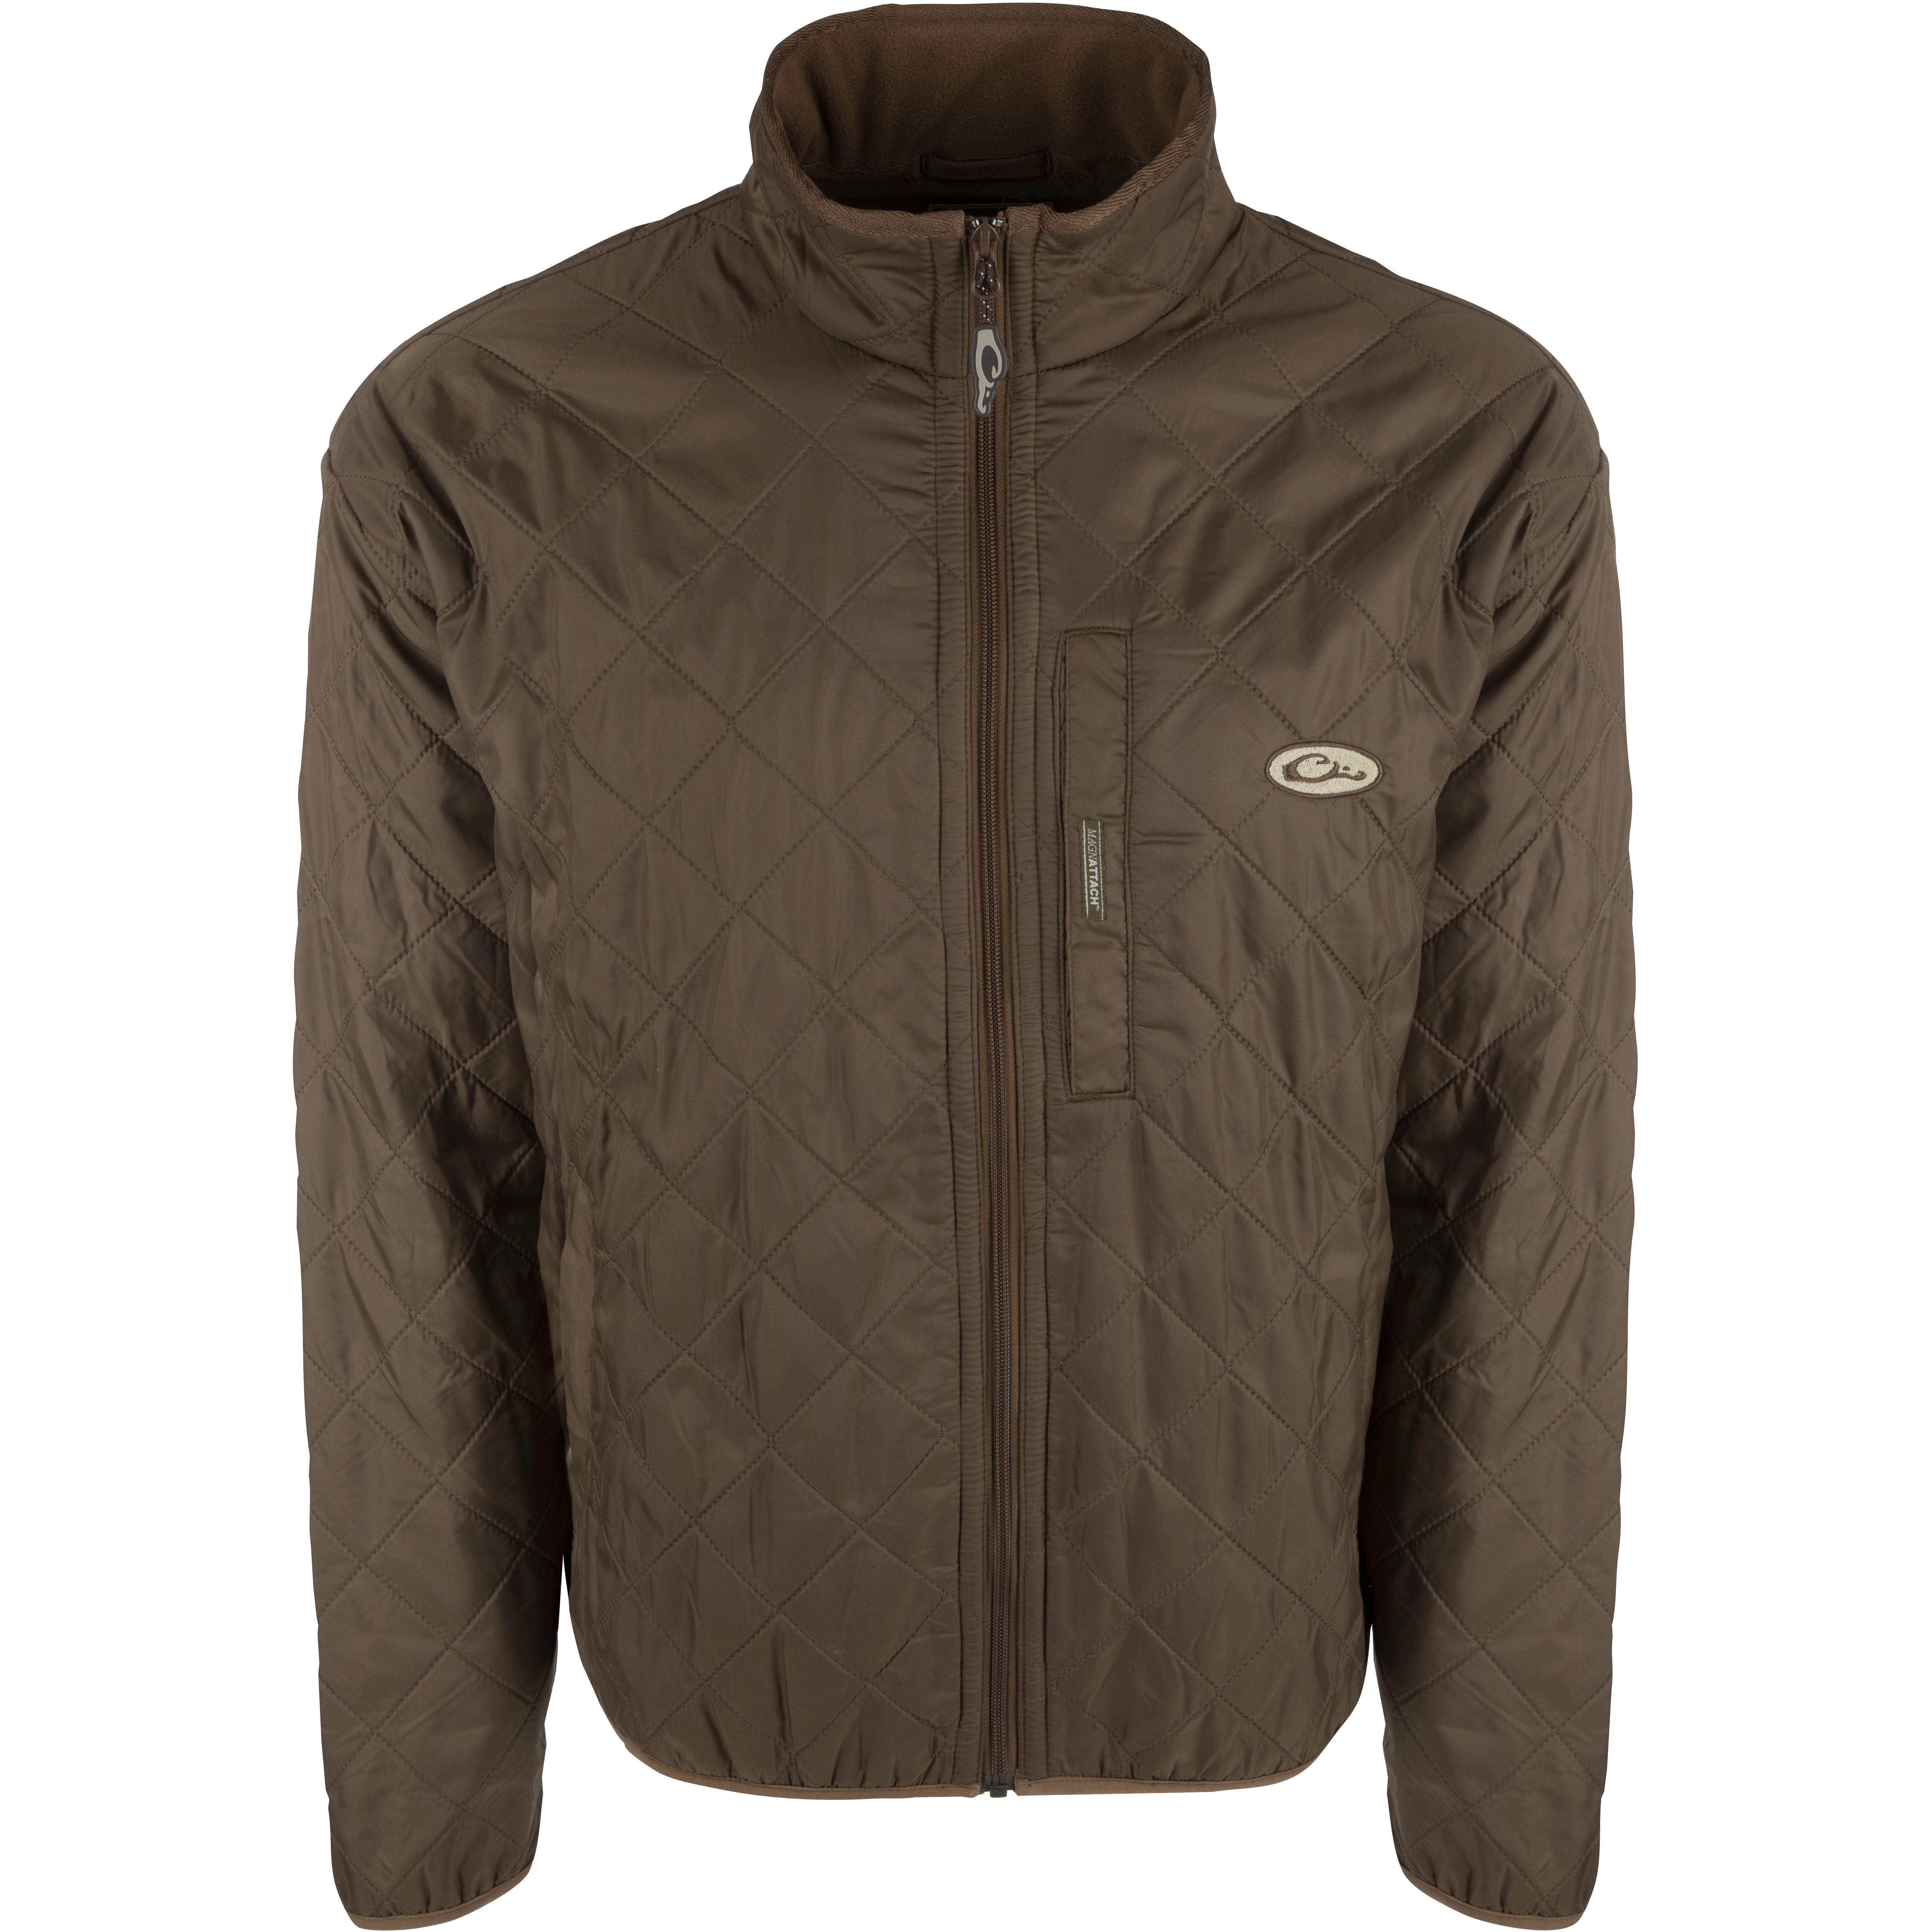 Drake-Quilted-Jacket-Fleece-Lined-Old-School-Barbour-Olive-Black-DW1071-dark-earth-big-tall-bigcamo